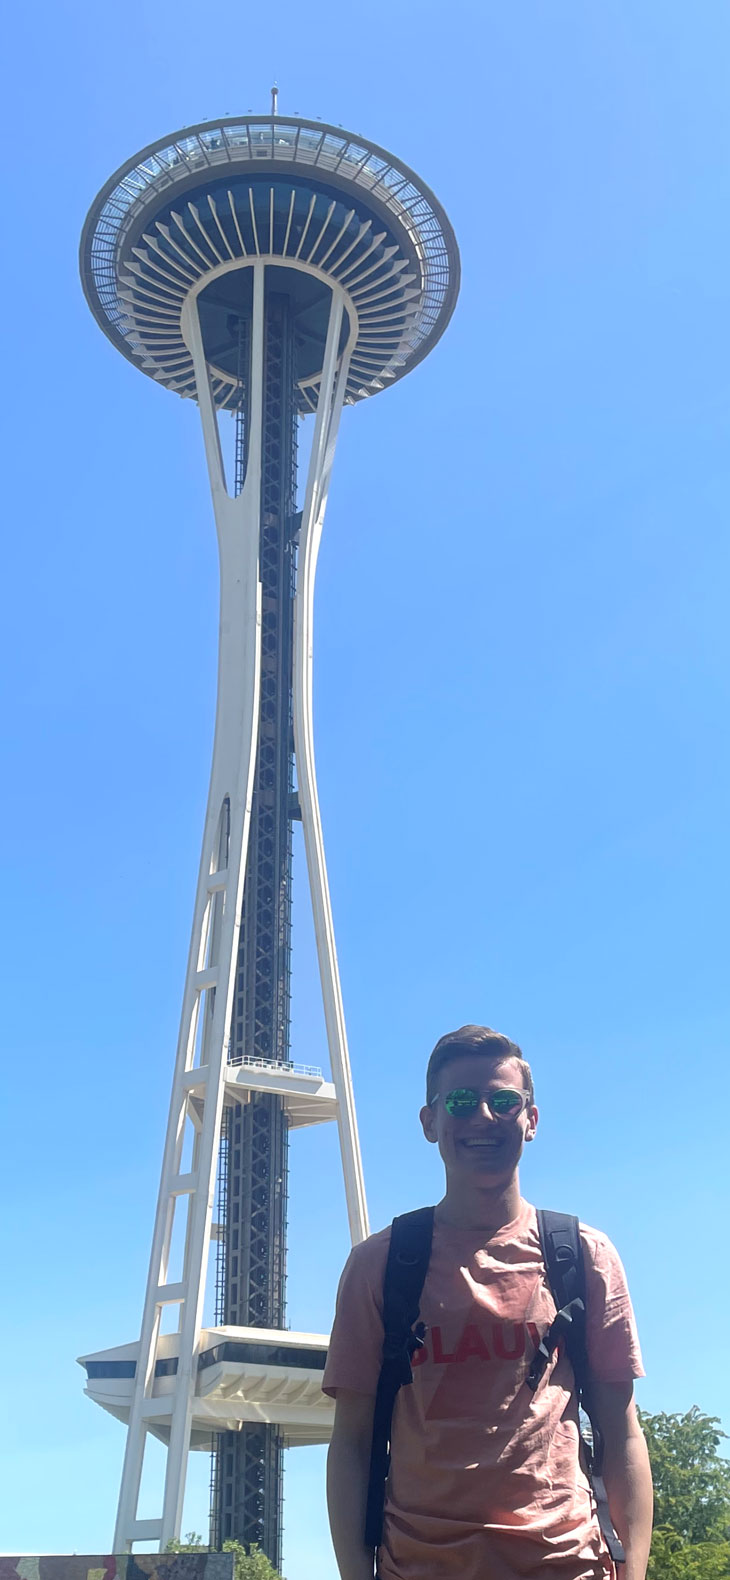 Thijmen Wijman standing in front of the Space needle